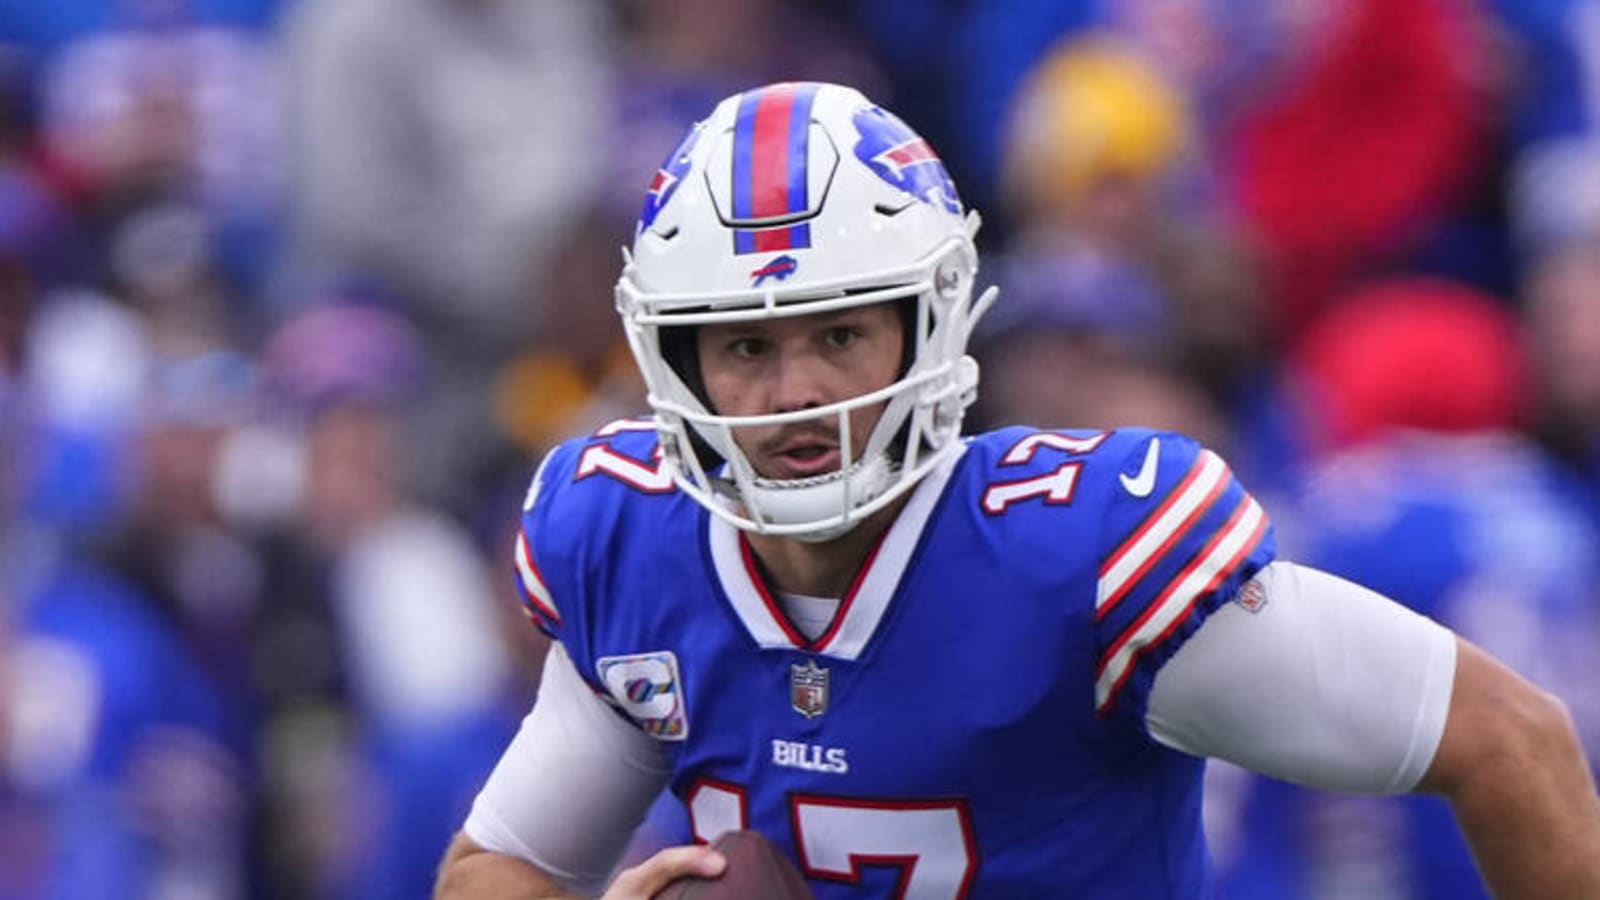 Josh Allen says he 'missed a few throws' after performance vs. Steelers